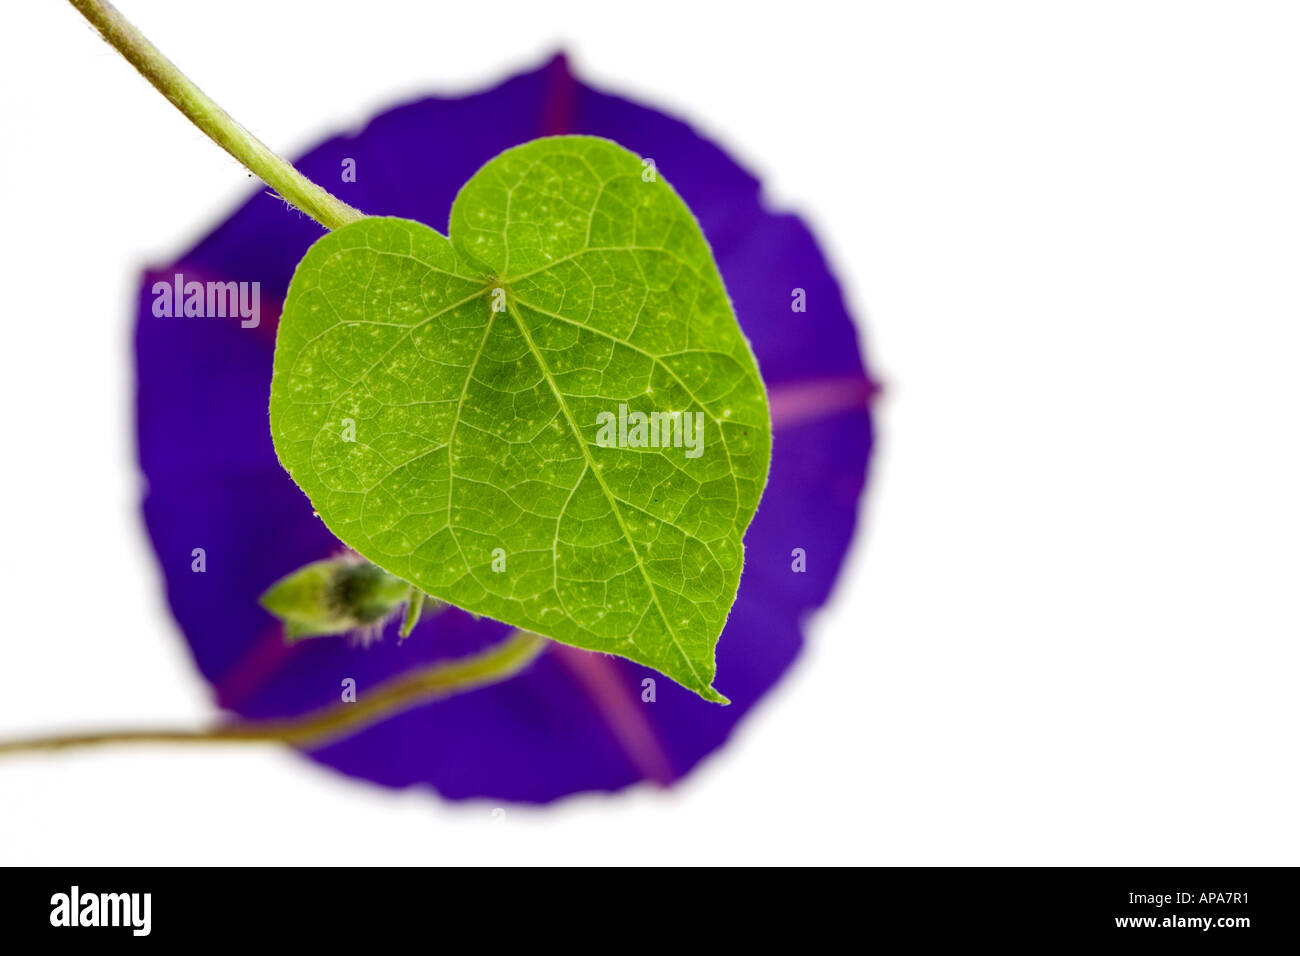 Ipomoea purpurea. Morning Glory heart shaped leaf and flower against white background Stock Photo